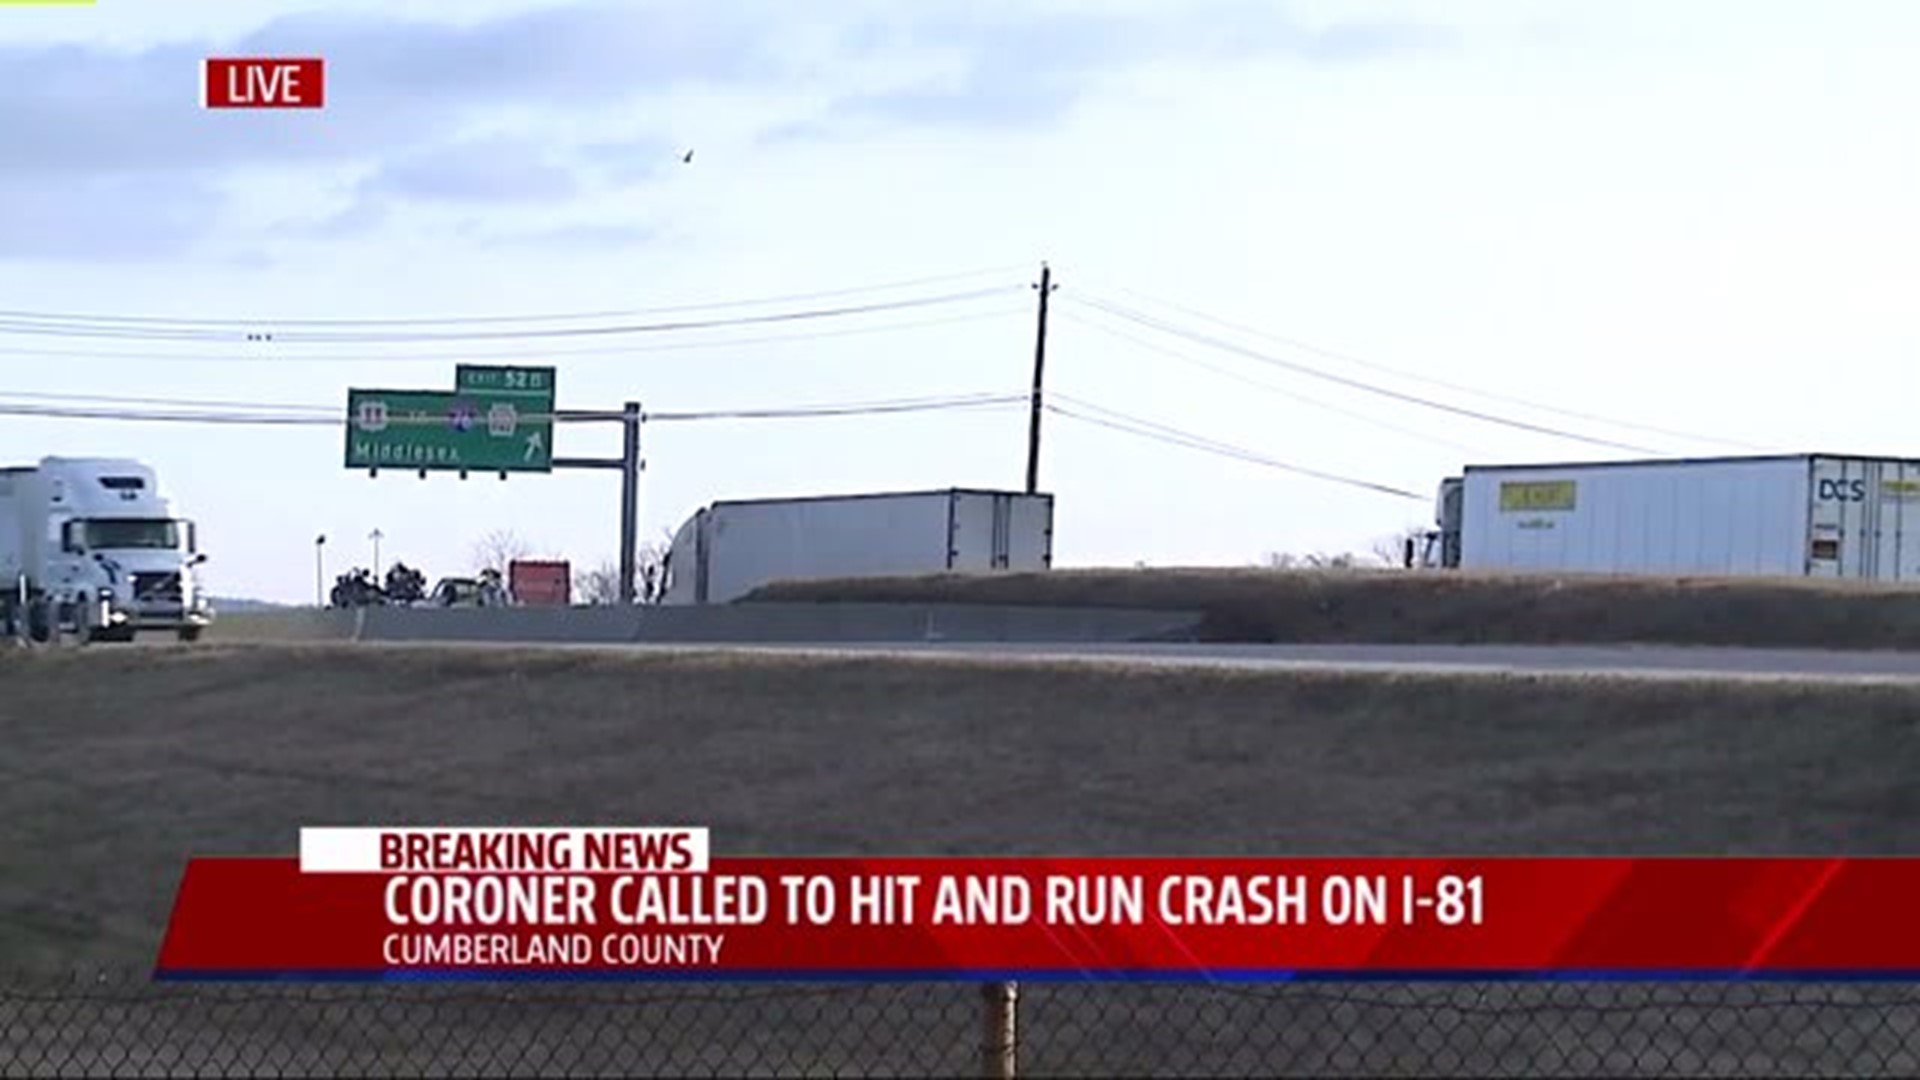 Coroner called to the scene of hit-and-run incident on Interstate 81 NB